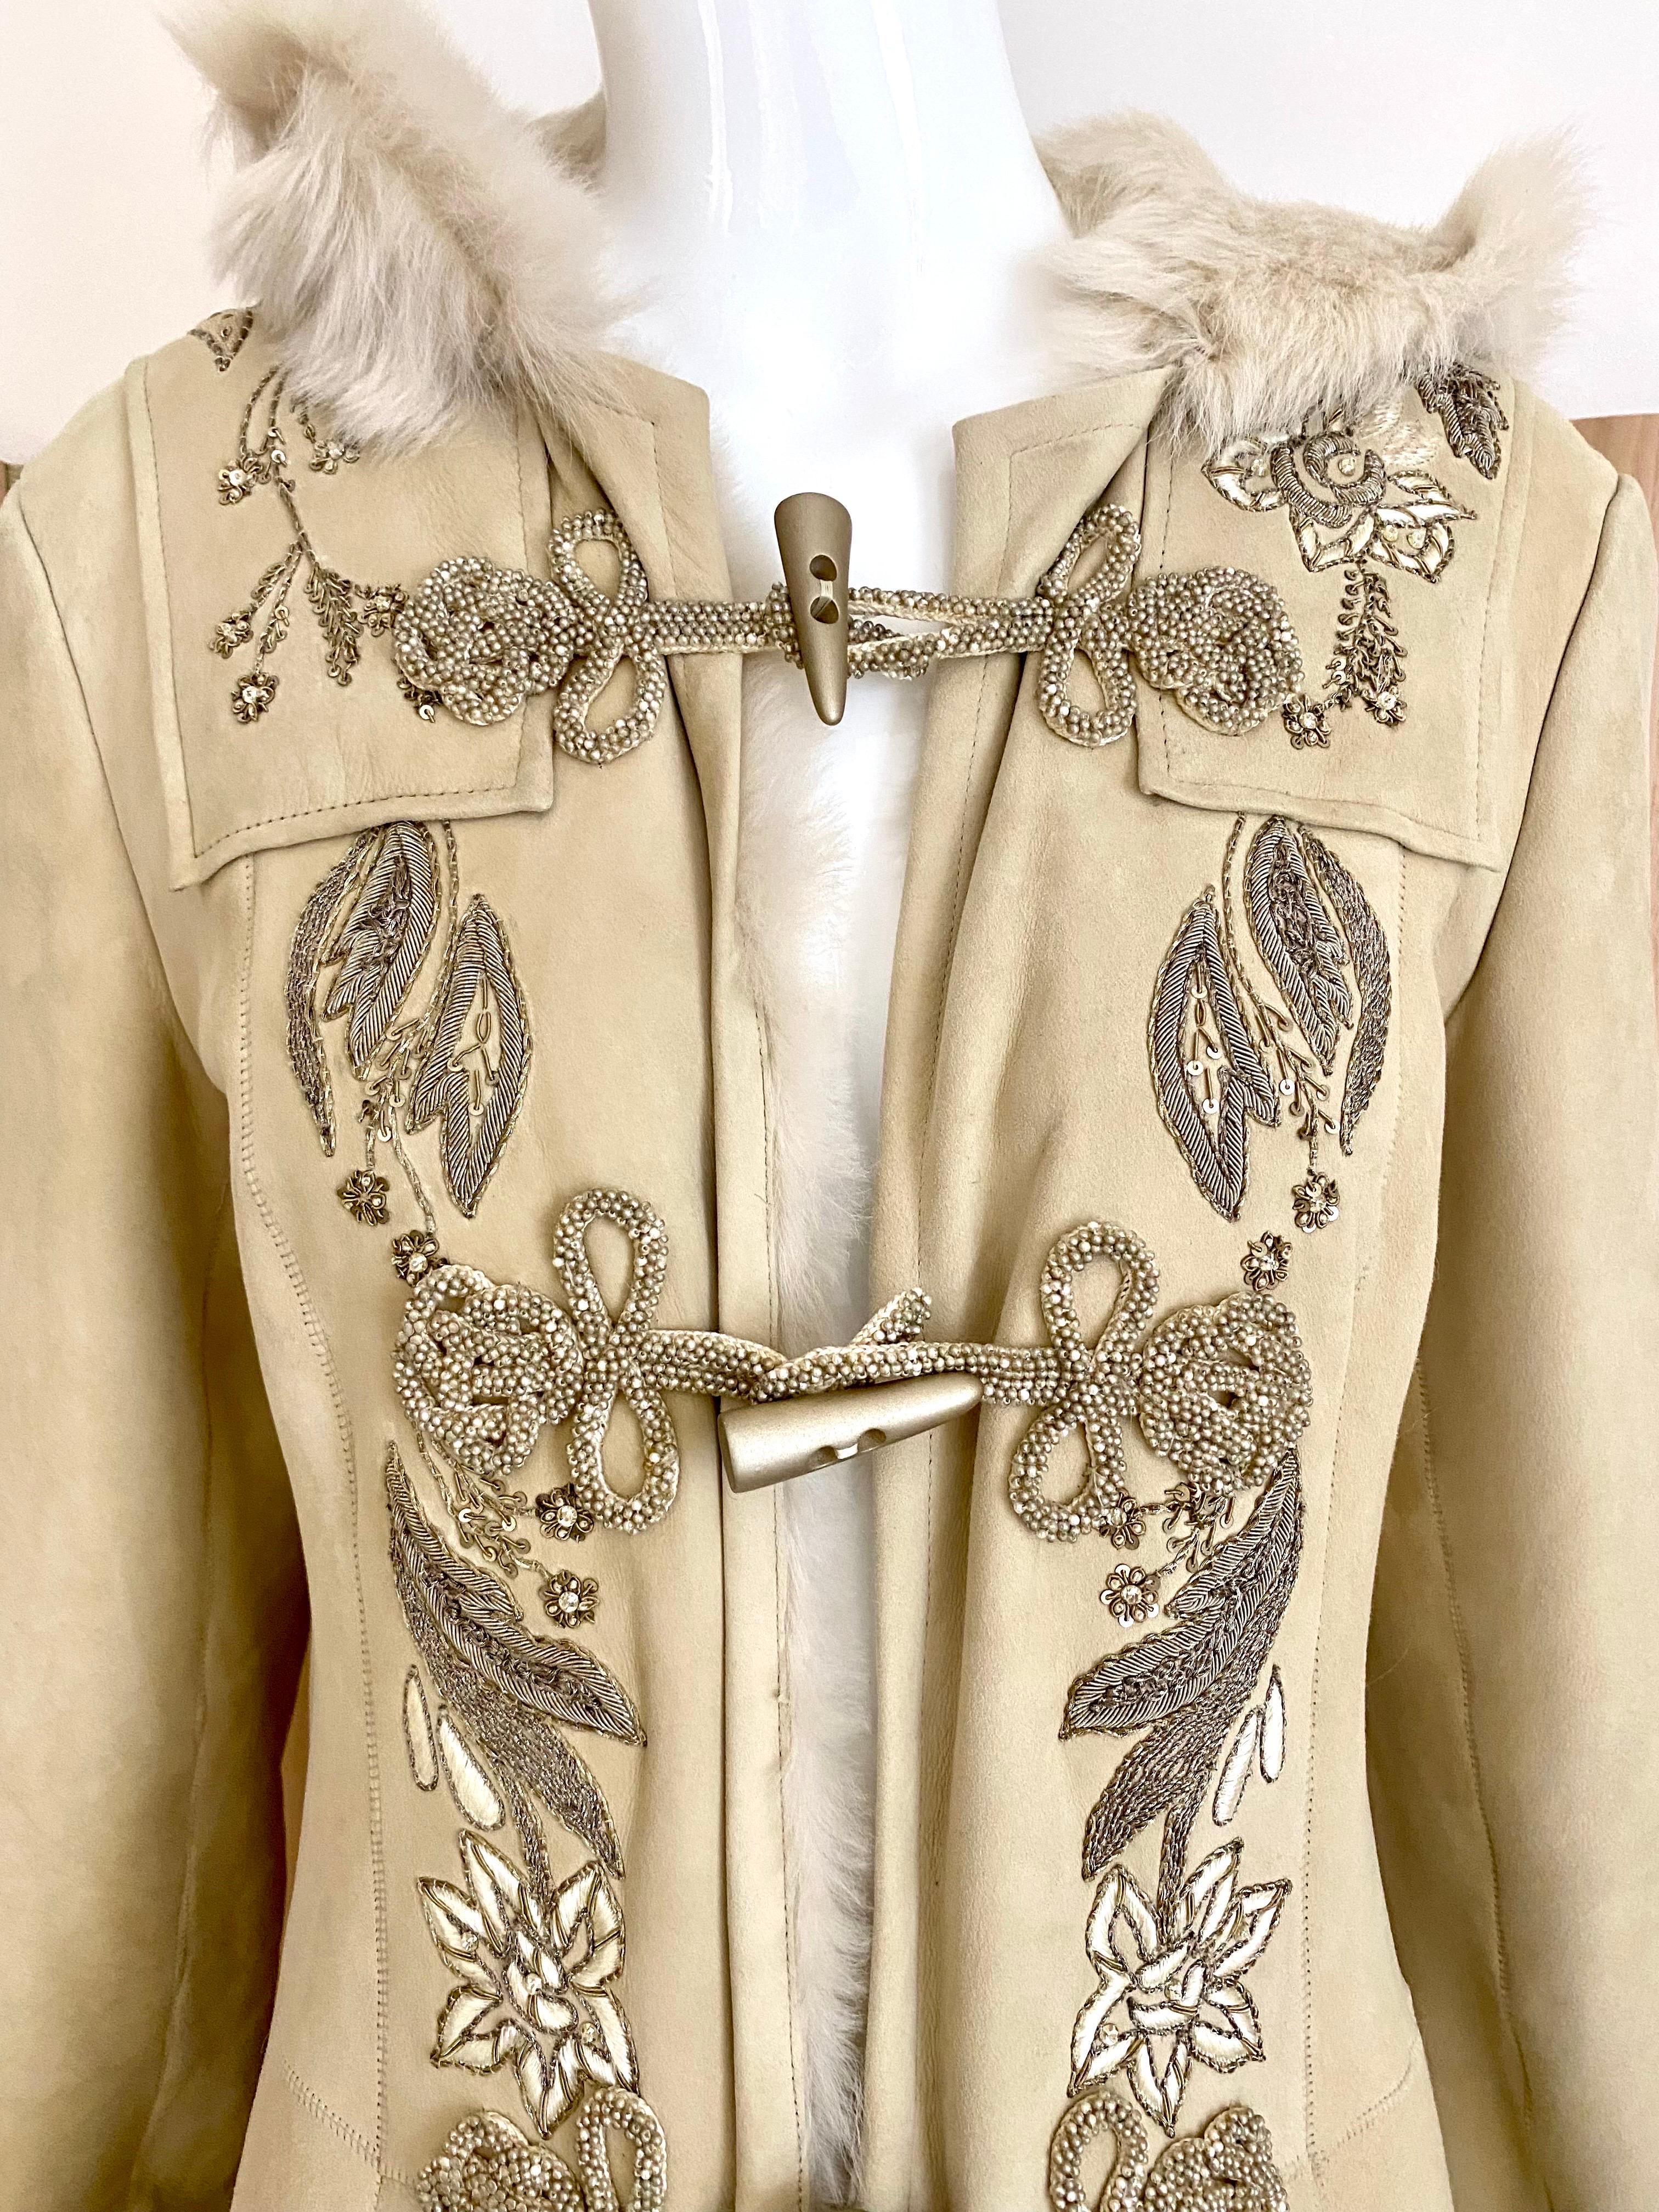 Ralph Lauren Purple Label Suede Shearling Coat embroidered with floral beads in gold, silver, and white. Toggle buttons. Pockets.
price tag $12.000
Marked Size: 8
Measurement: Bust: 36” / Waist: 32” / Hip: 36”/ Coat Length: 54” / Sleeve : 27”